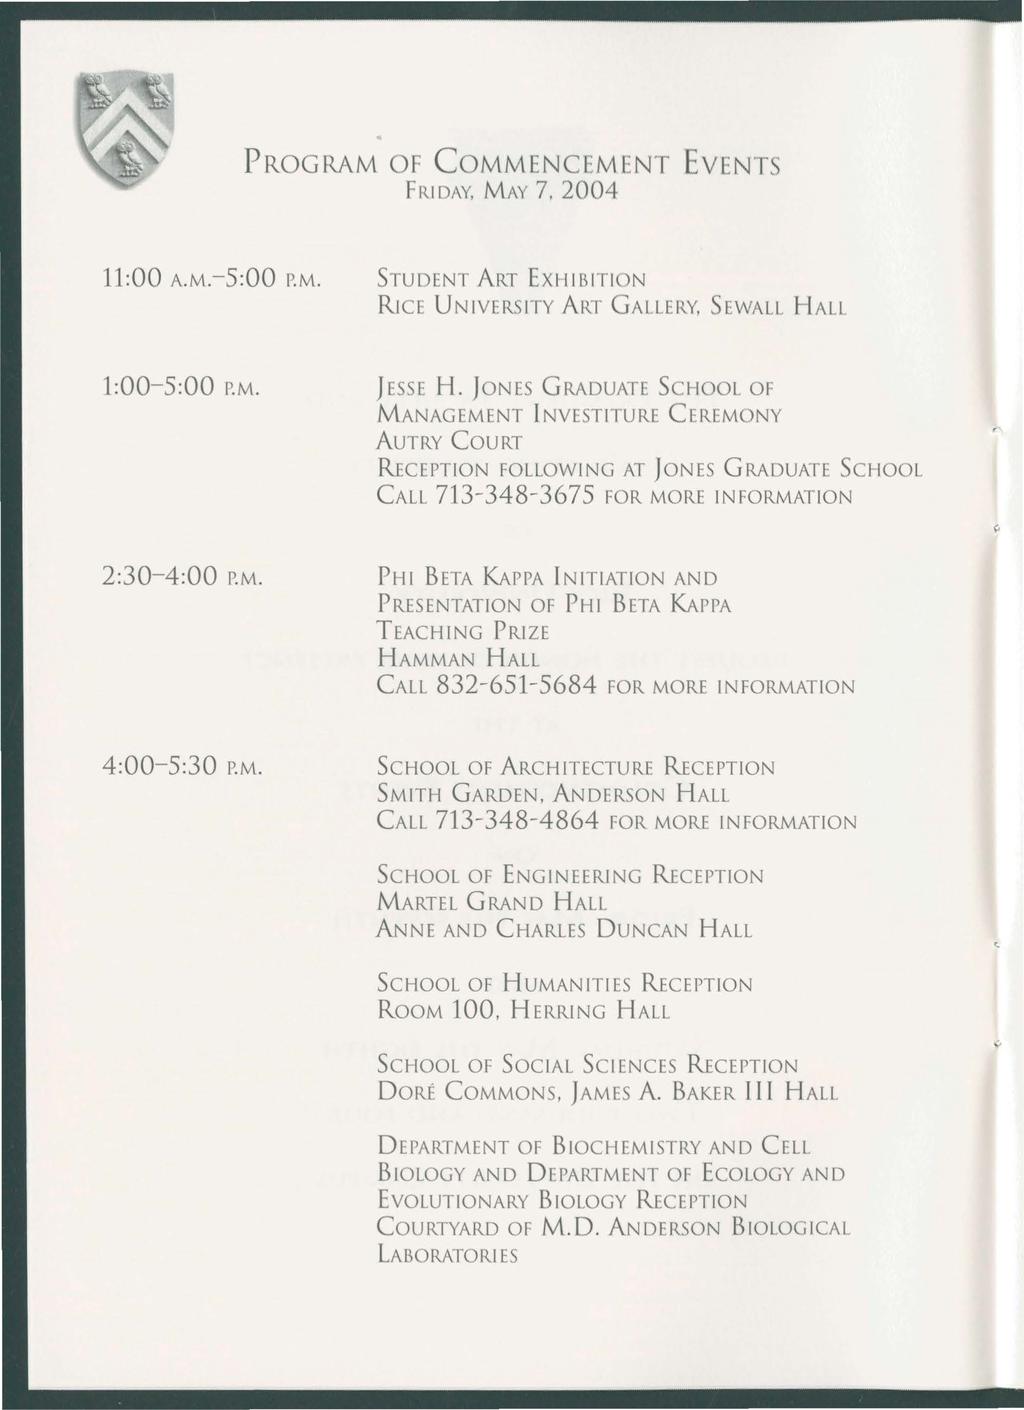 PROGRAM OF COMMENCEMENT EVENTS FRIDAY, MAY 7, 2004 11:00 A.M.-5:00 P.M. STUDENT ART EXHIBITION RicE UNIVERSITY ART GALLERY, SEWALL HALL 1:00-5:00 P.M. )ESSE H.